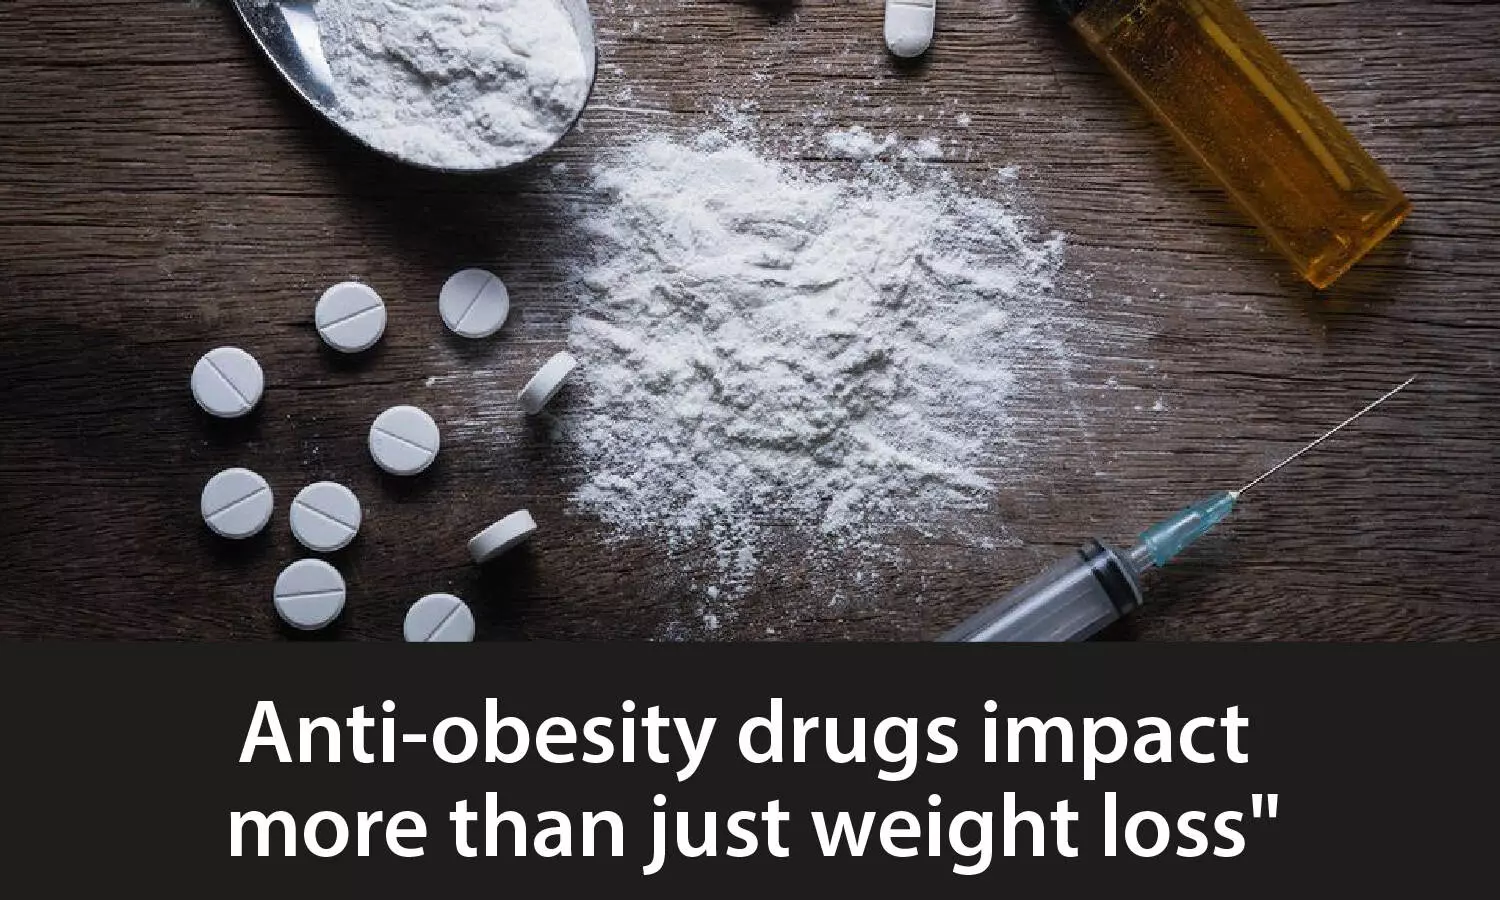 Anti obesity drugs can shrink more than patients